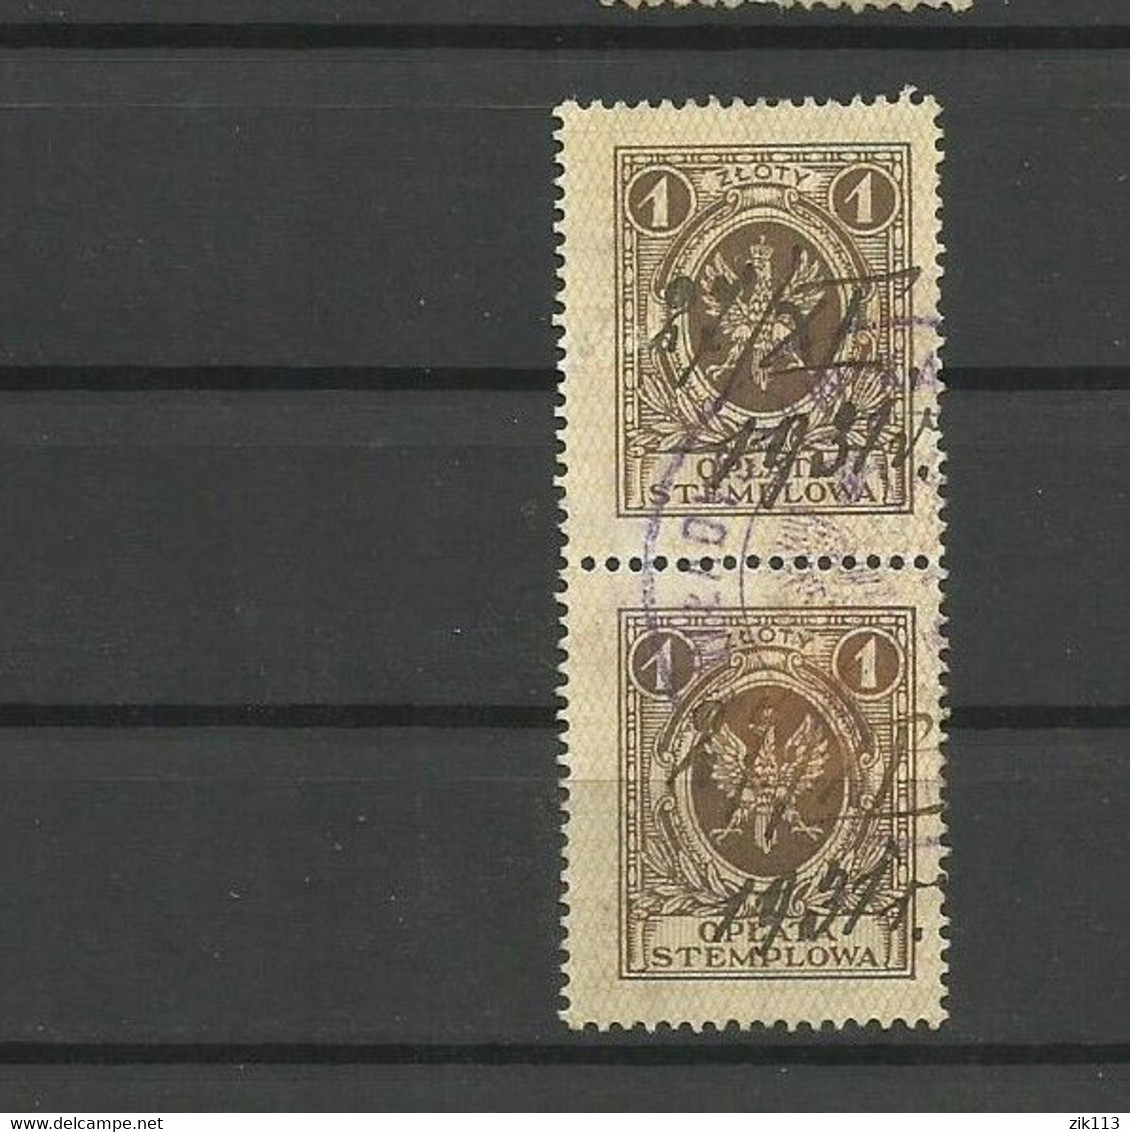 Poland 1931 - A Pair Of Stamps, Revenue, Used - Revenue Stamps